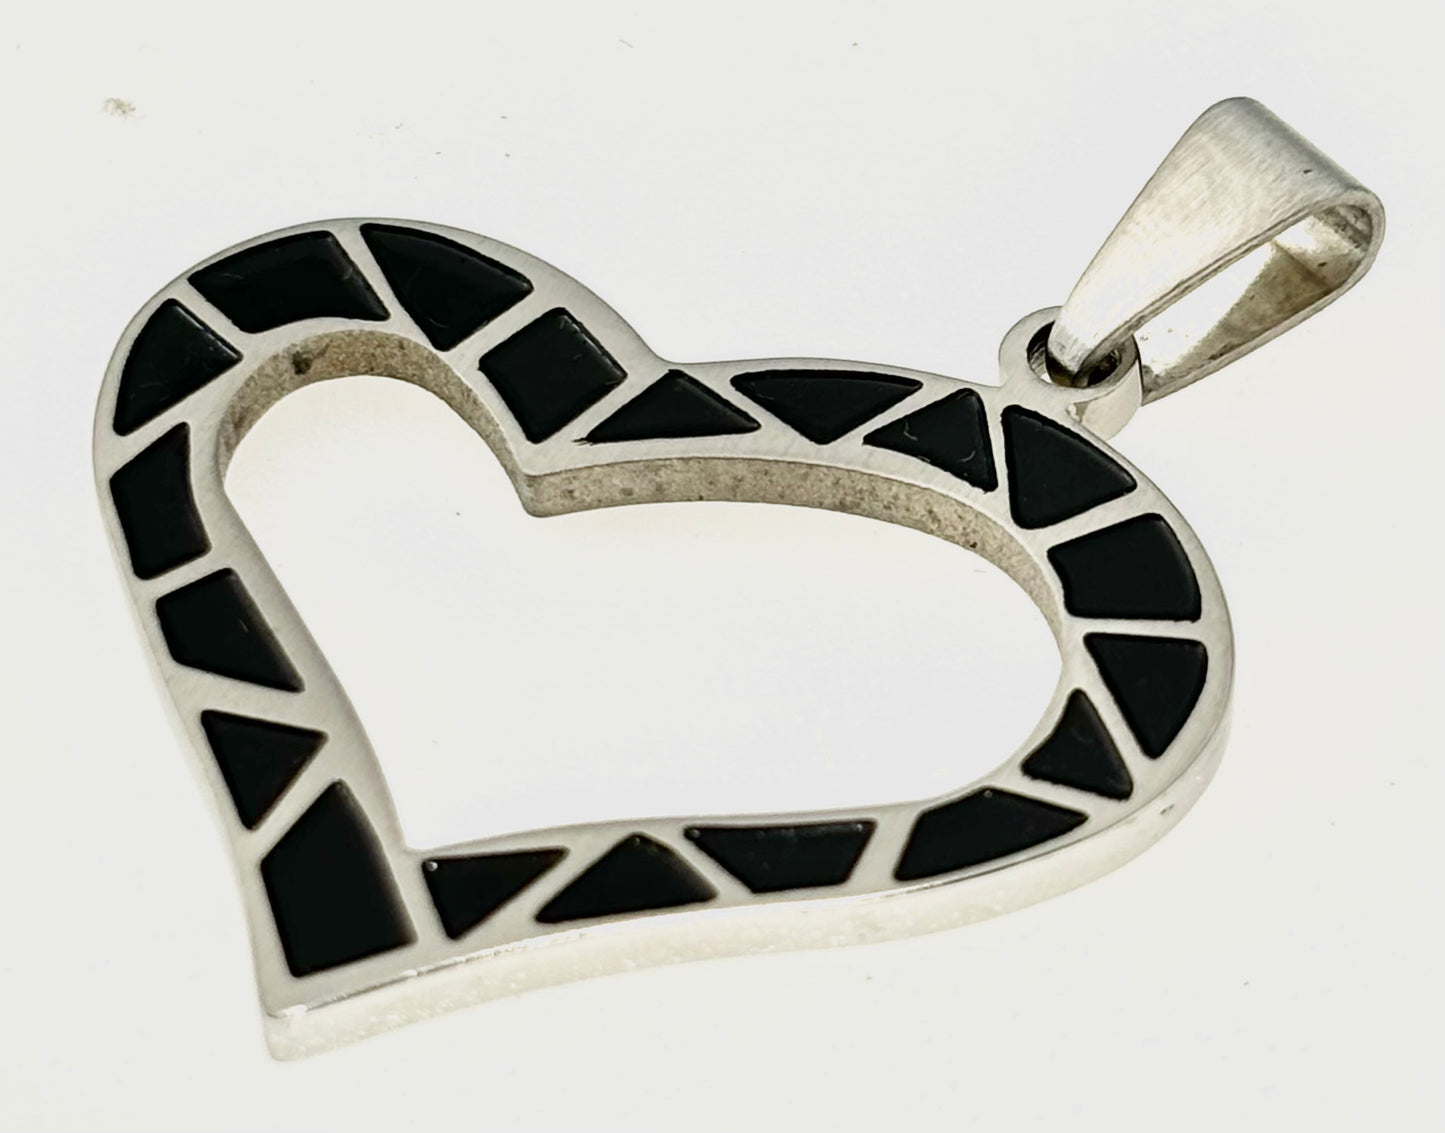 JEWELRY BLACK ENAMEL HEART PENDANT WITH A CHAIN 18"